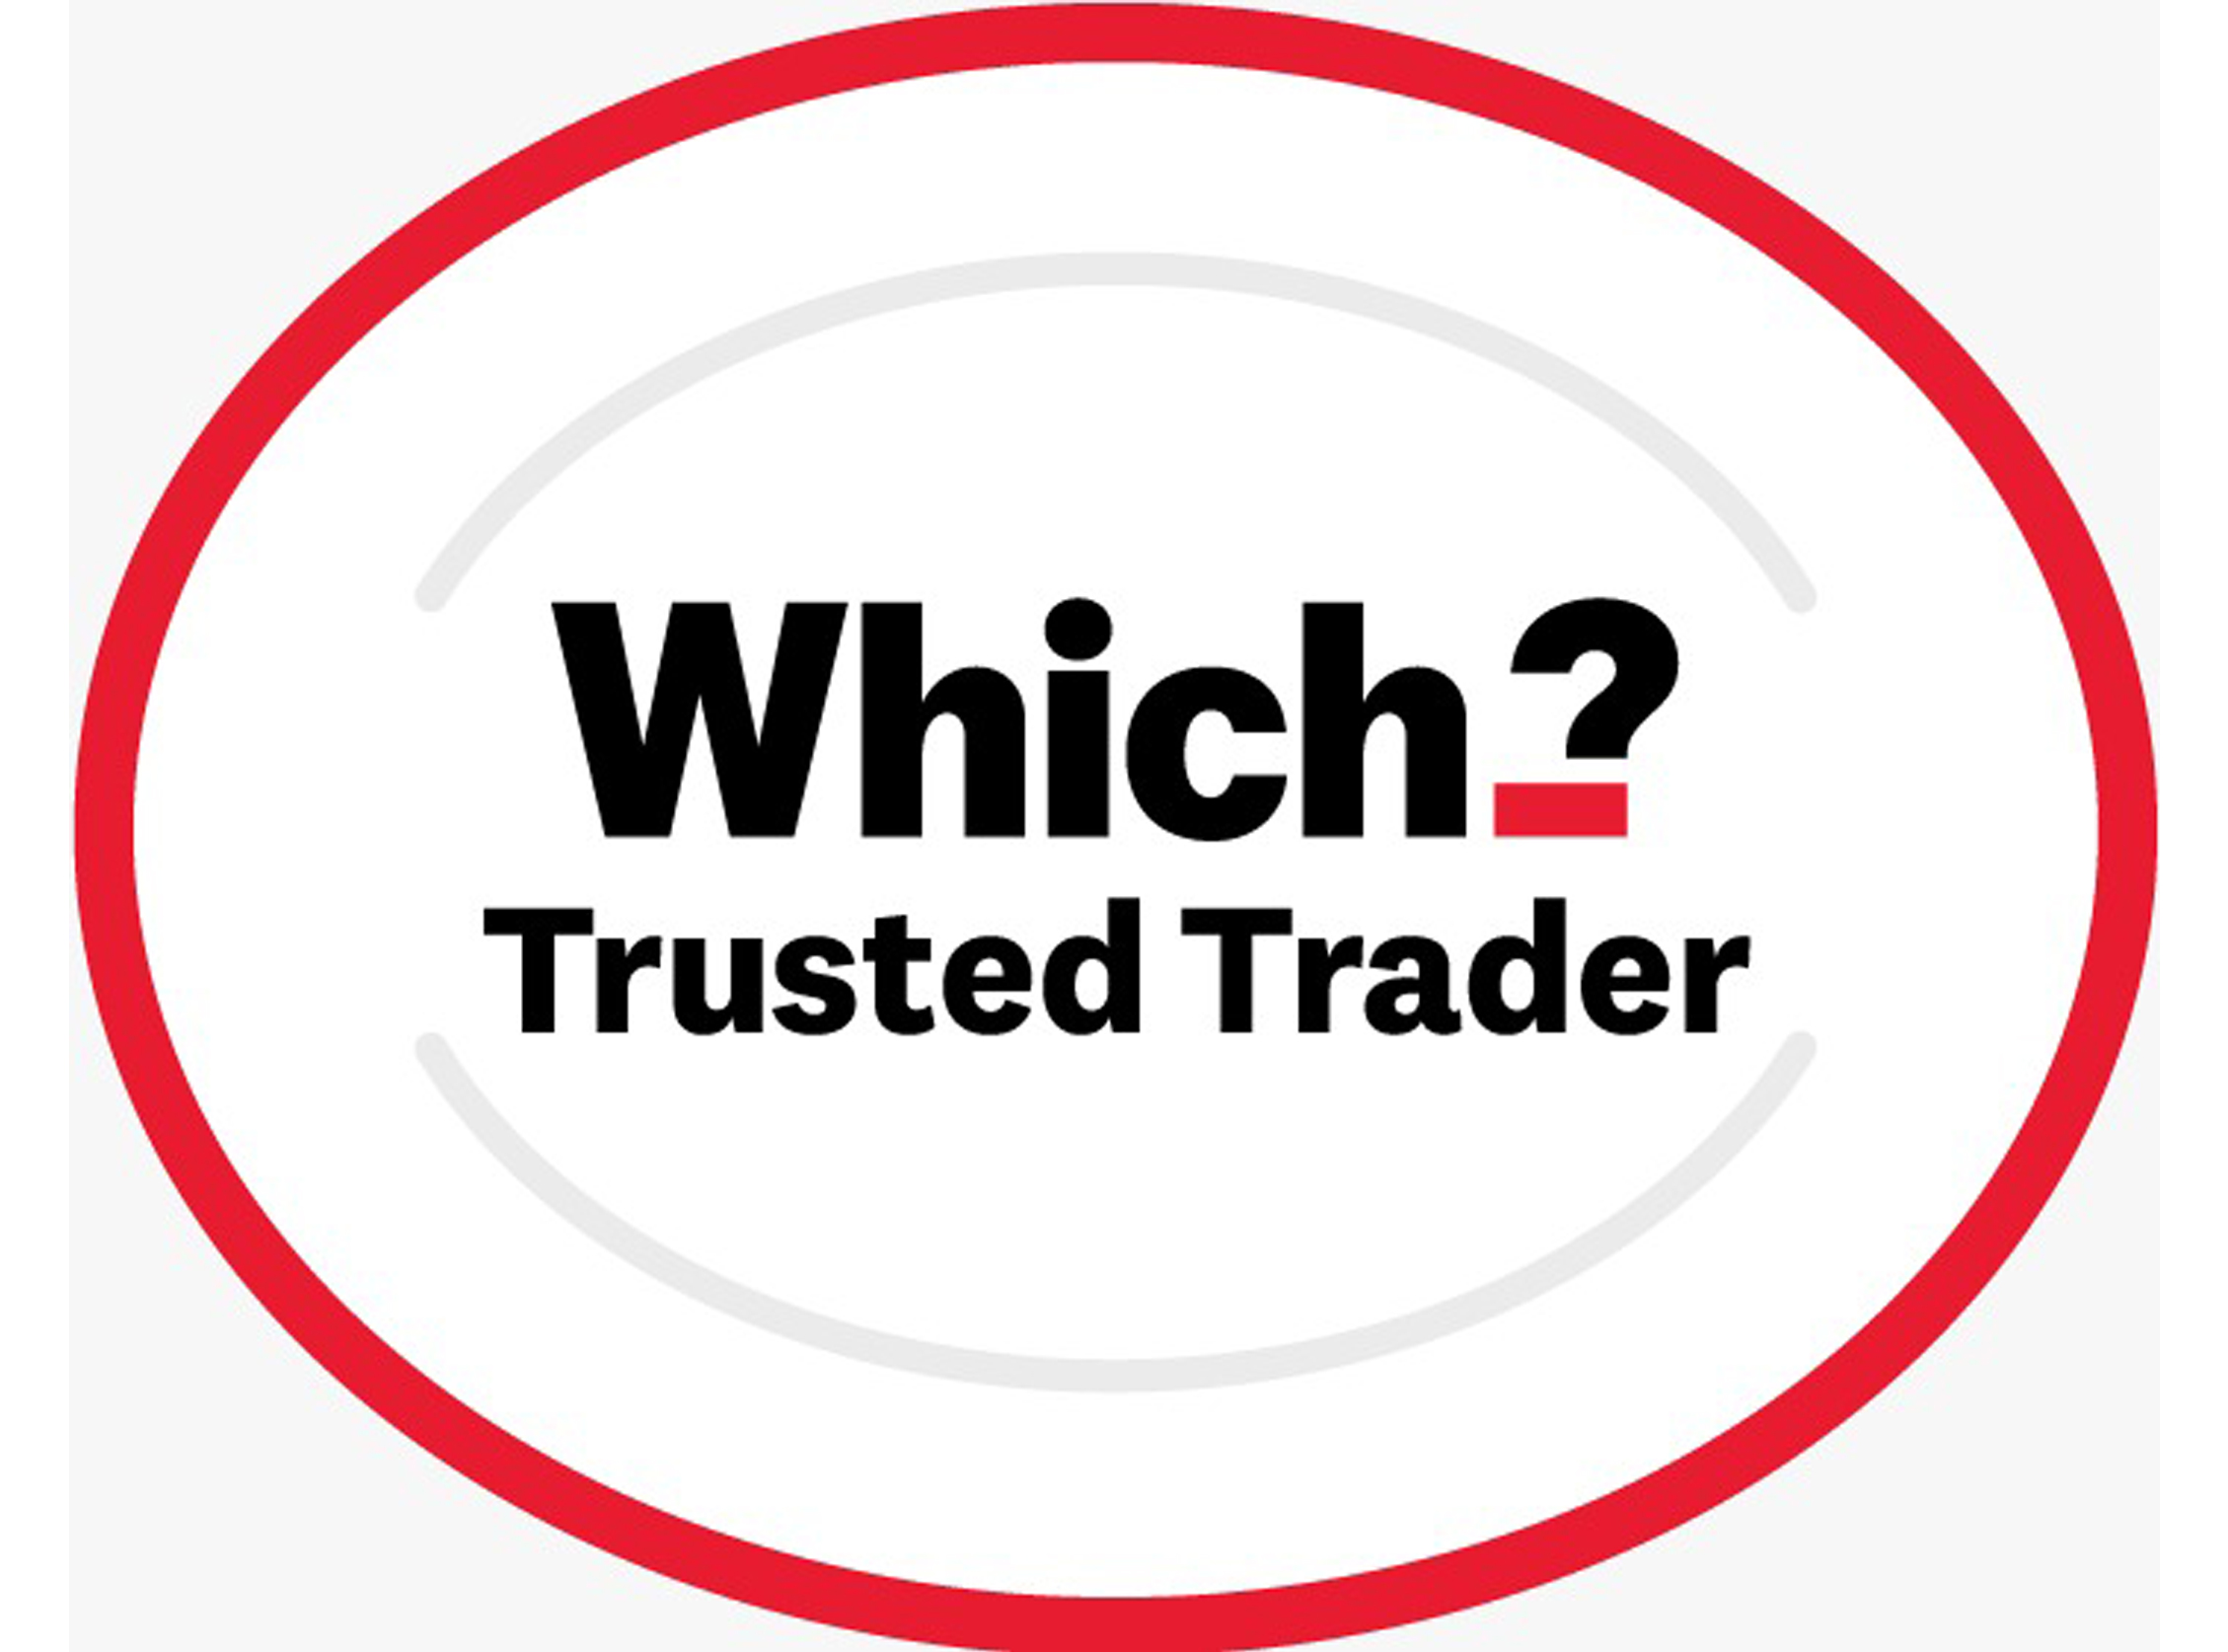 WHICH TRUSTED TRADERS